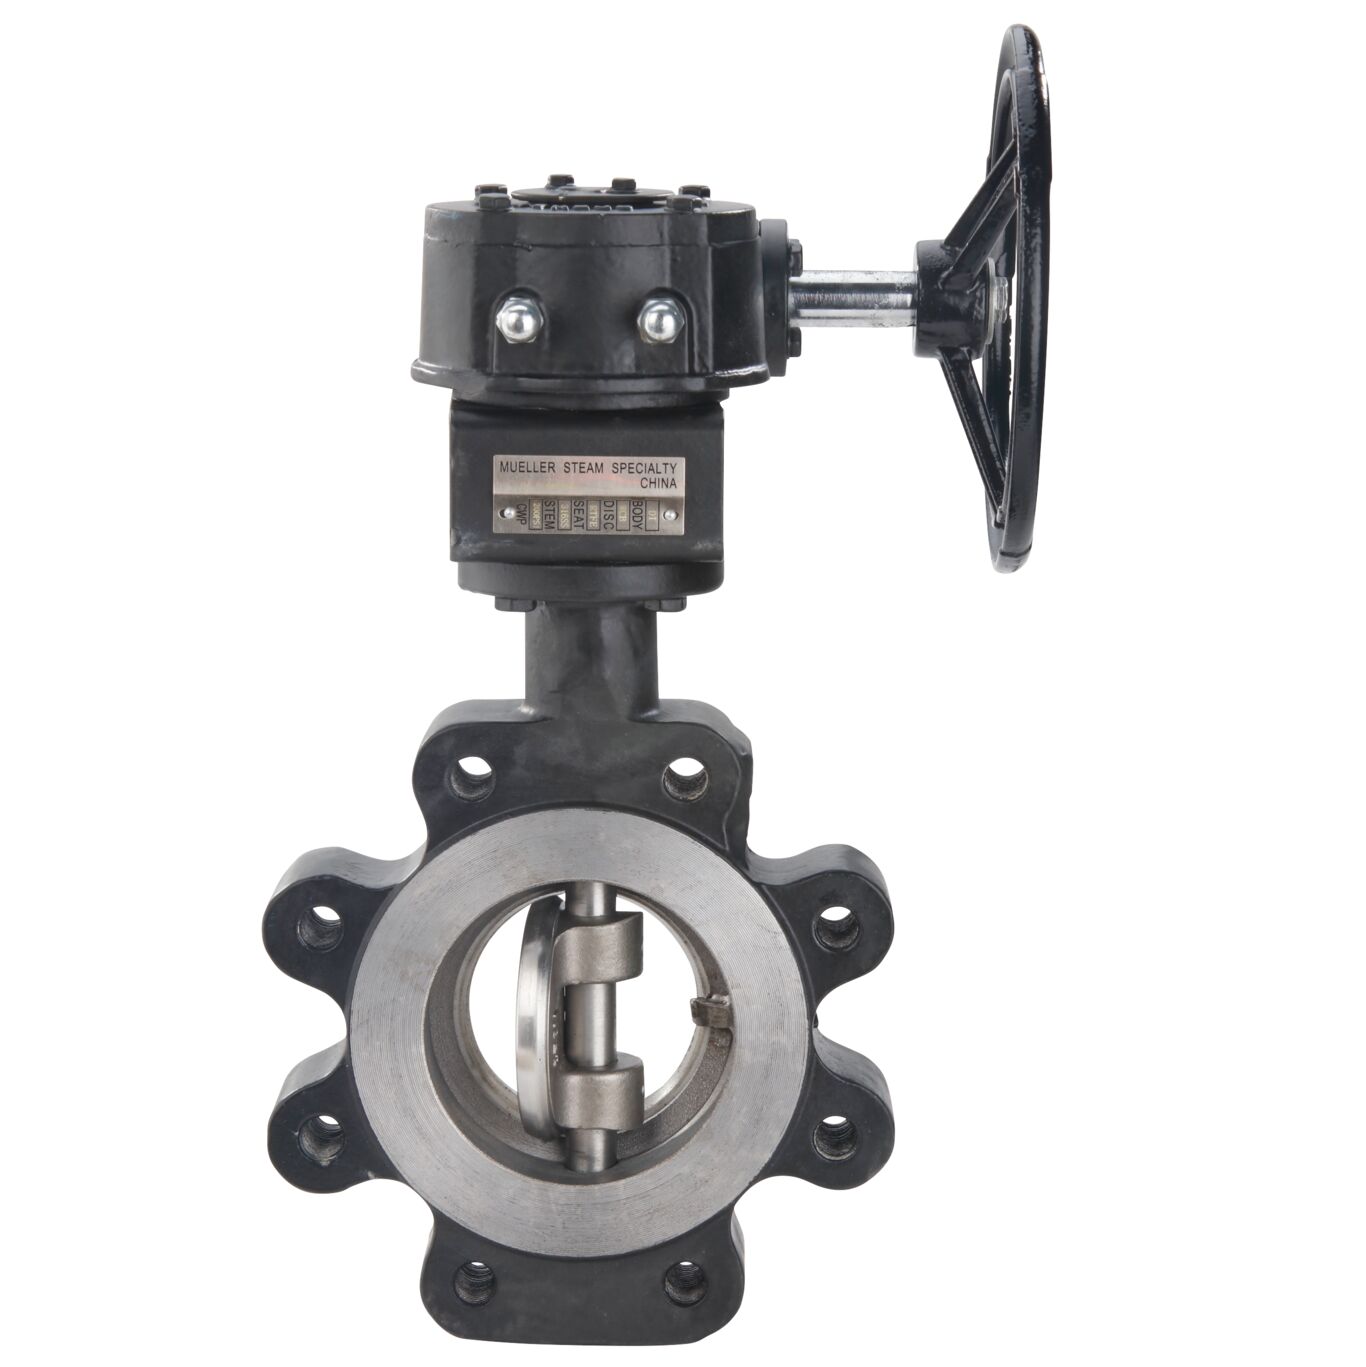 Hight Performance Butterfly valve open view